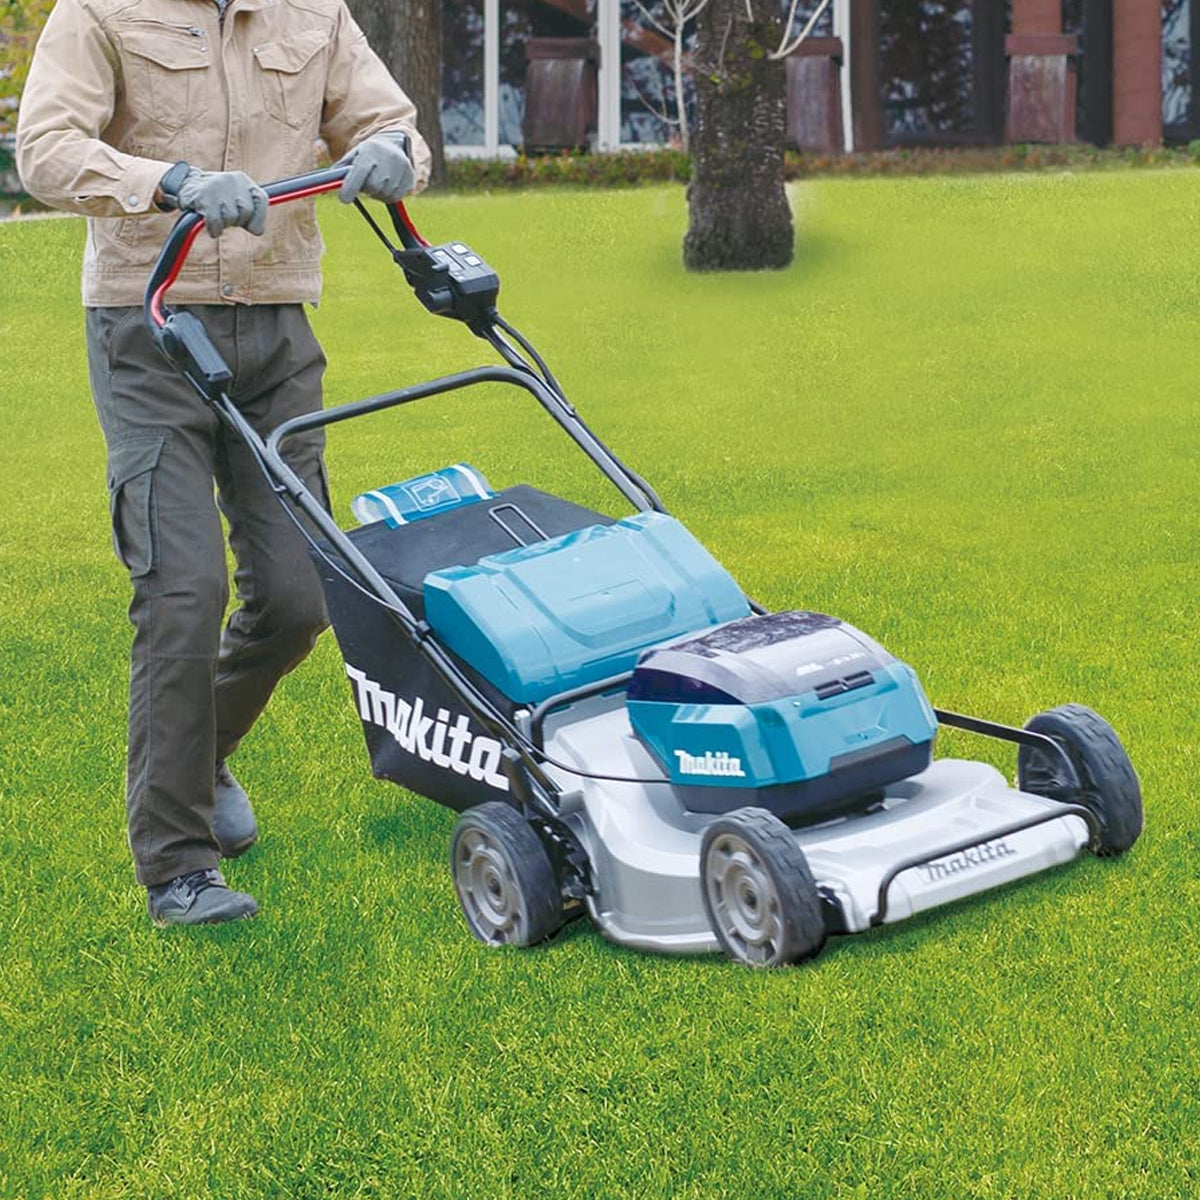 Makita DLM533PT4 36V LXT Brushless 530mm Lawn Mower With 4 x 5.0Ah Batteries & Twin Port Charger